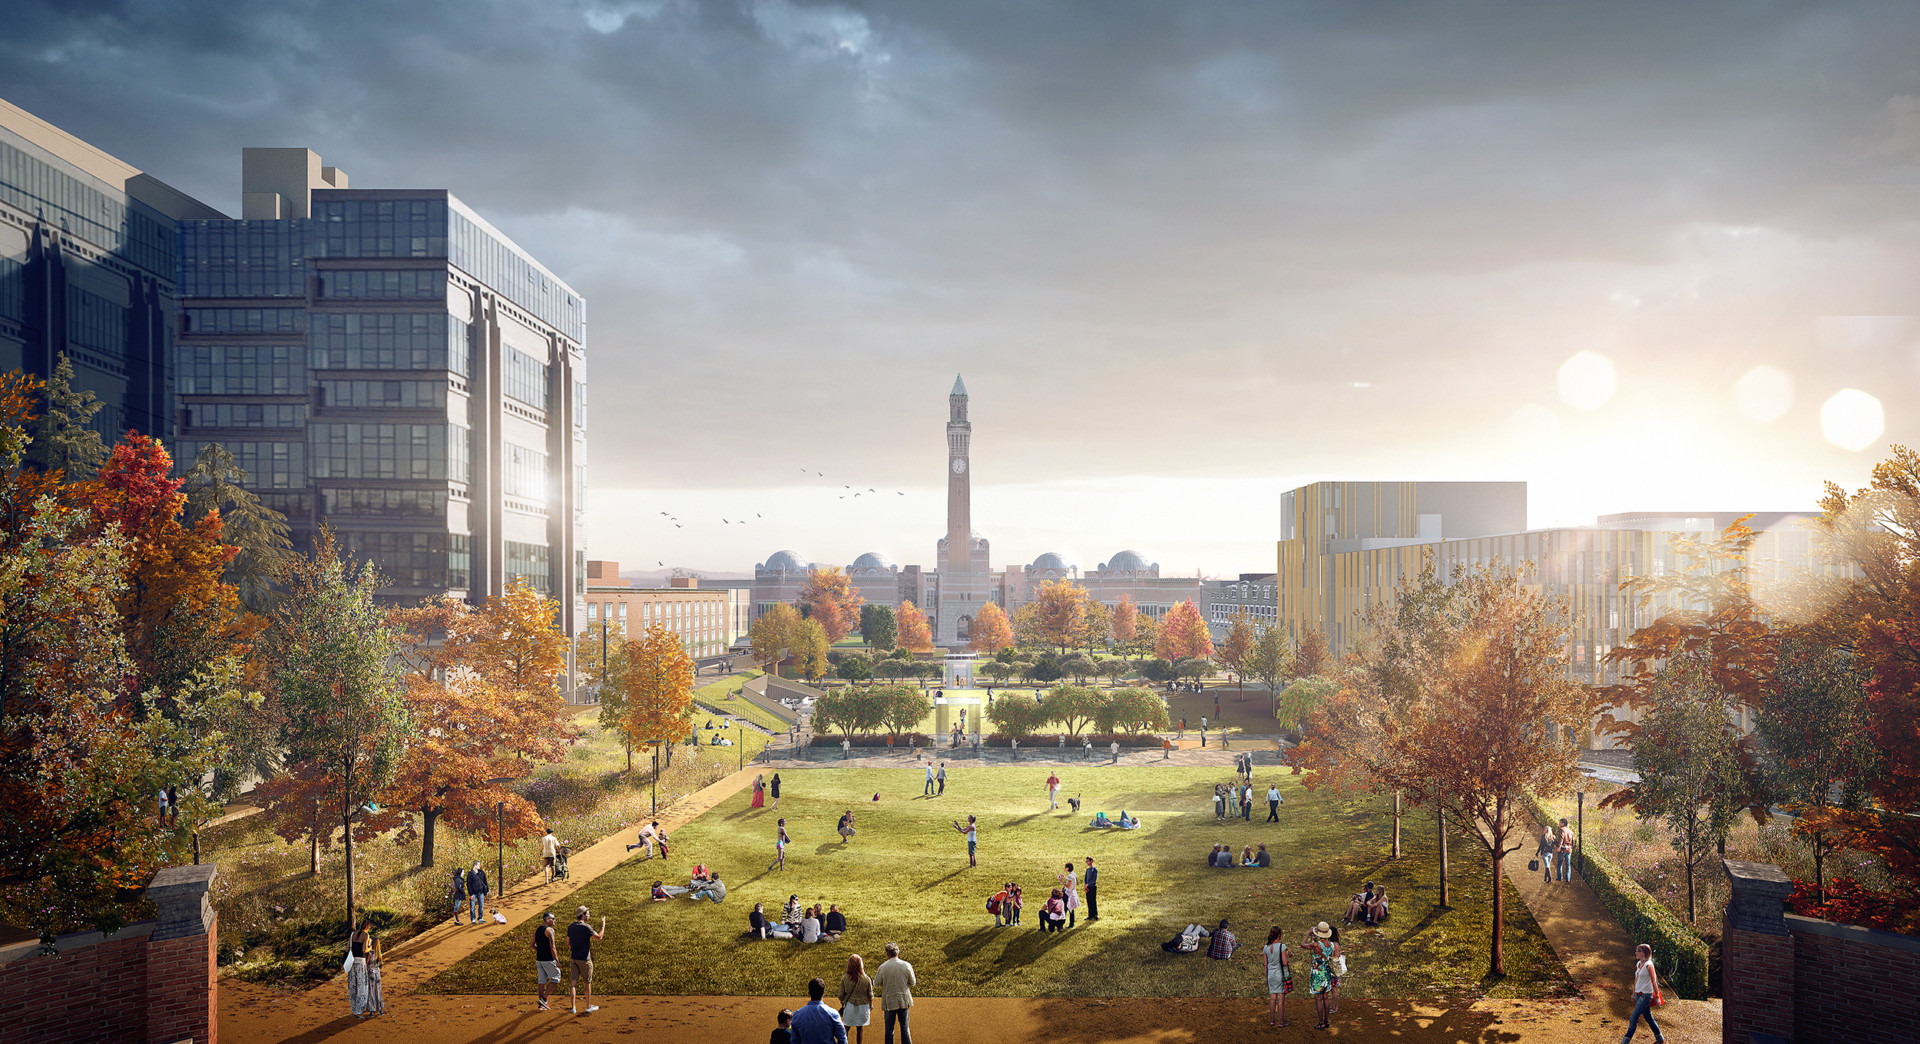 We have successfully secured a new project with Willmott Dixon to construct a striking new parkland at the centre of the University of Birmingham campus known as Green Heart.